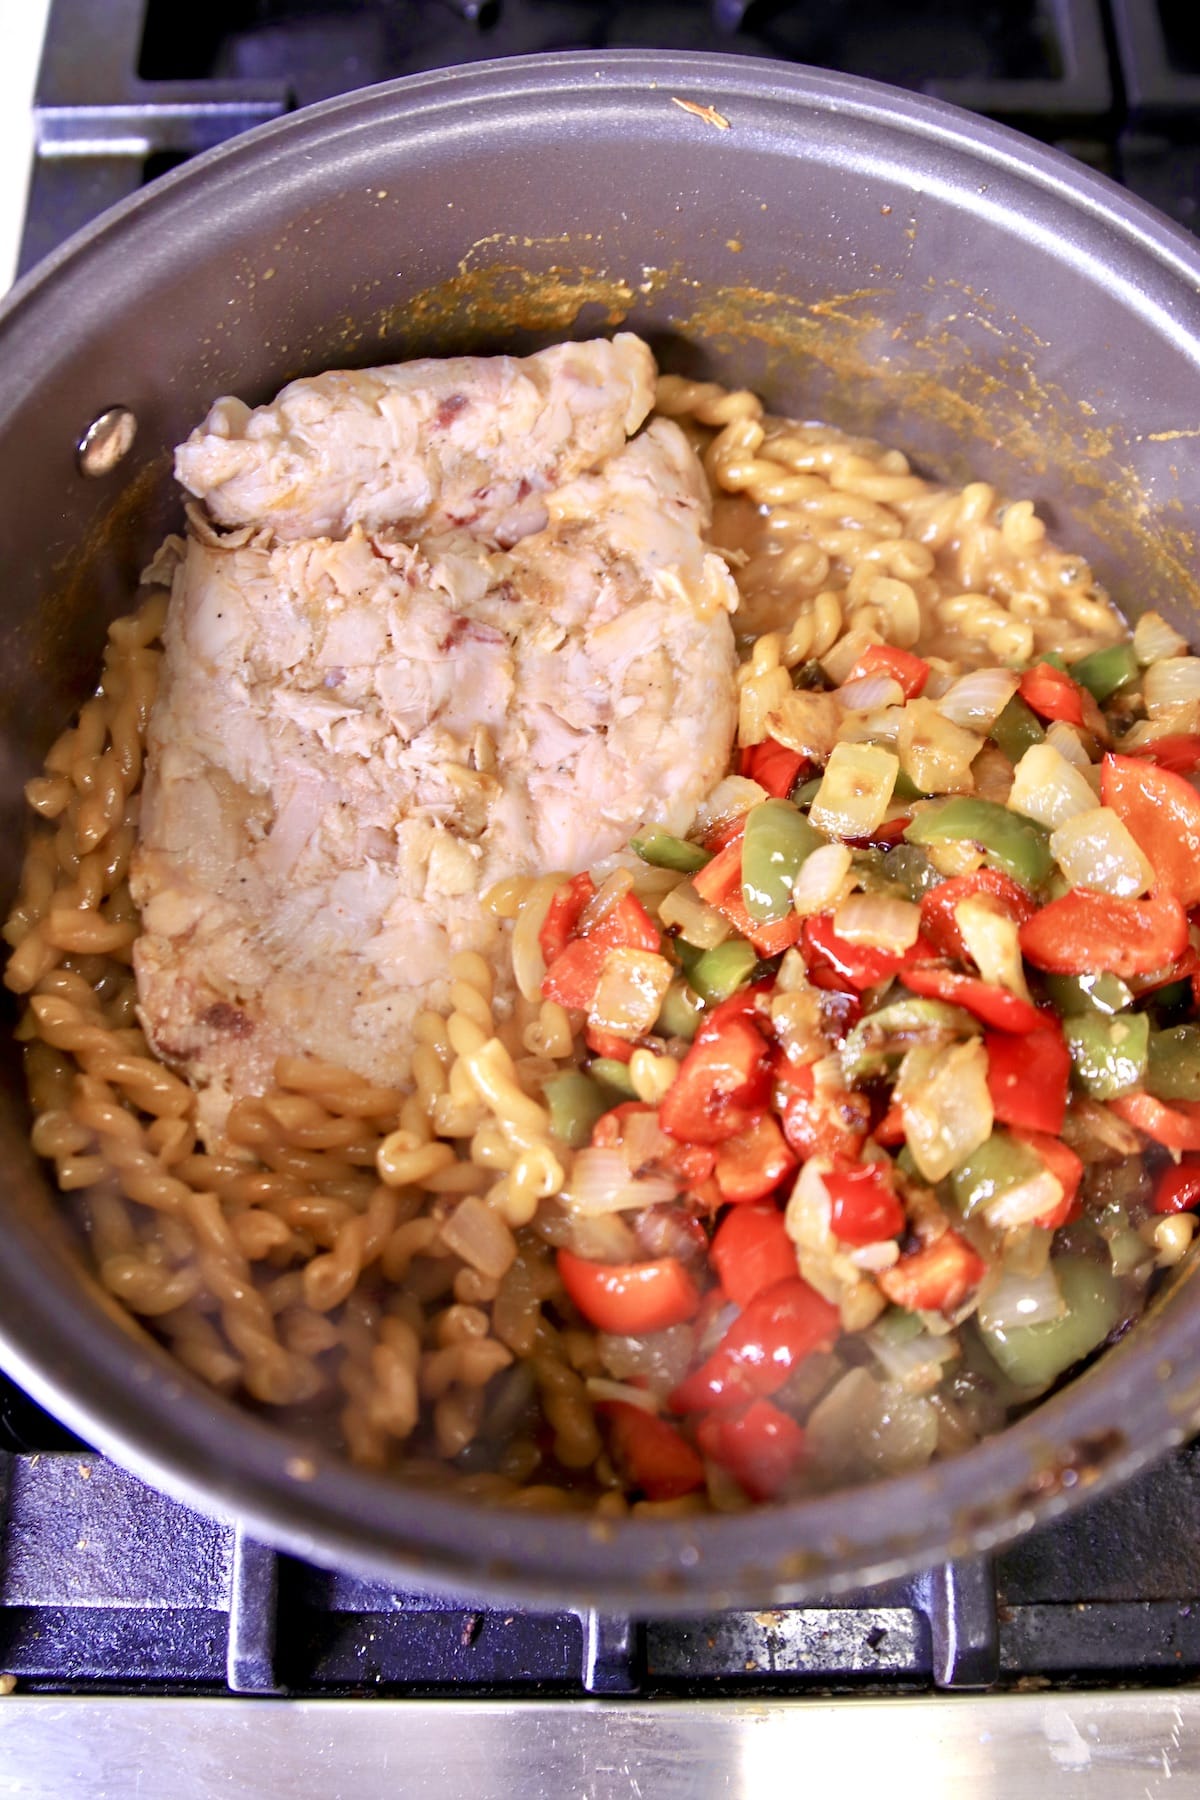 Pan with cooked pasta, chopped chicken, sauteed vegetables.